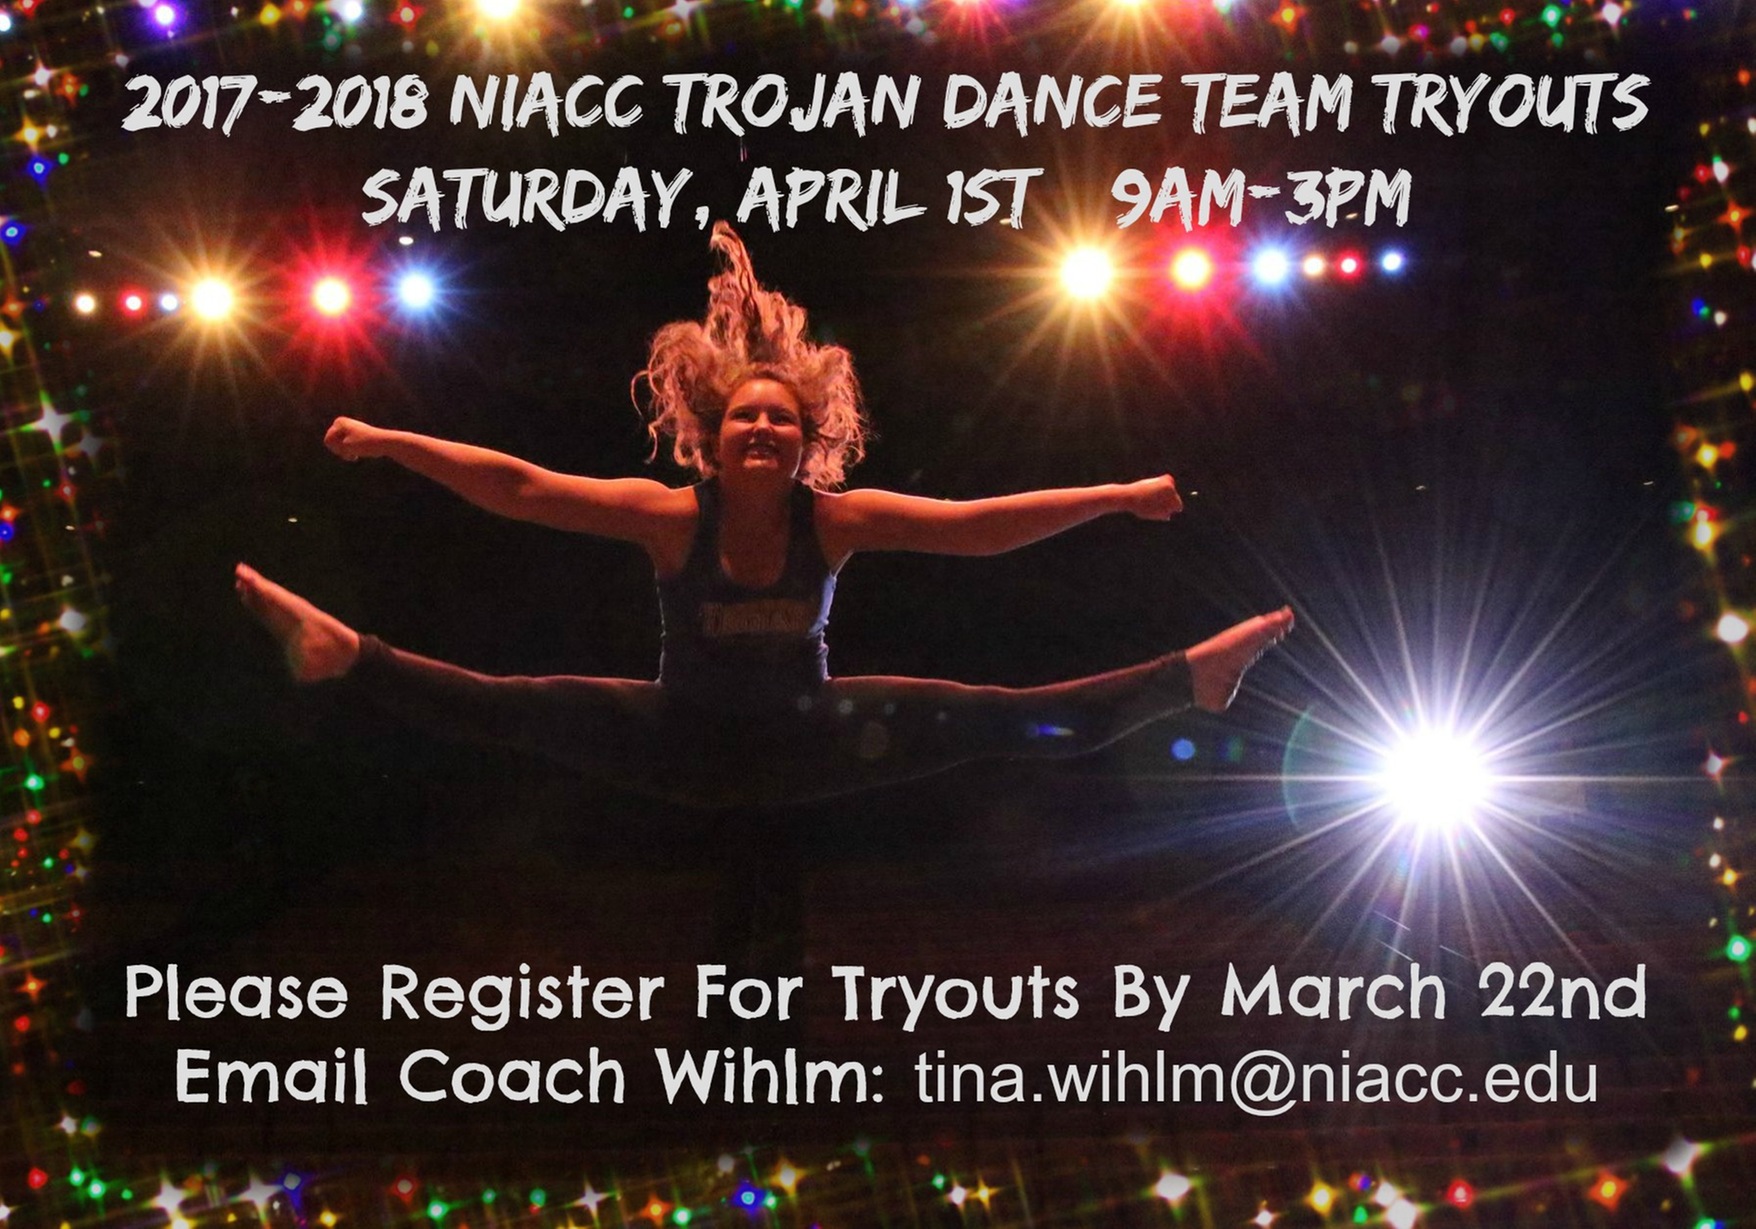 NIACC Dance Team tryouts set for April 1